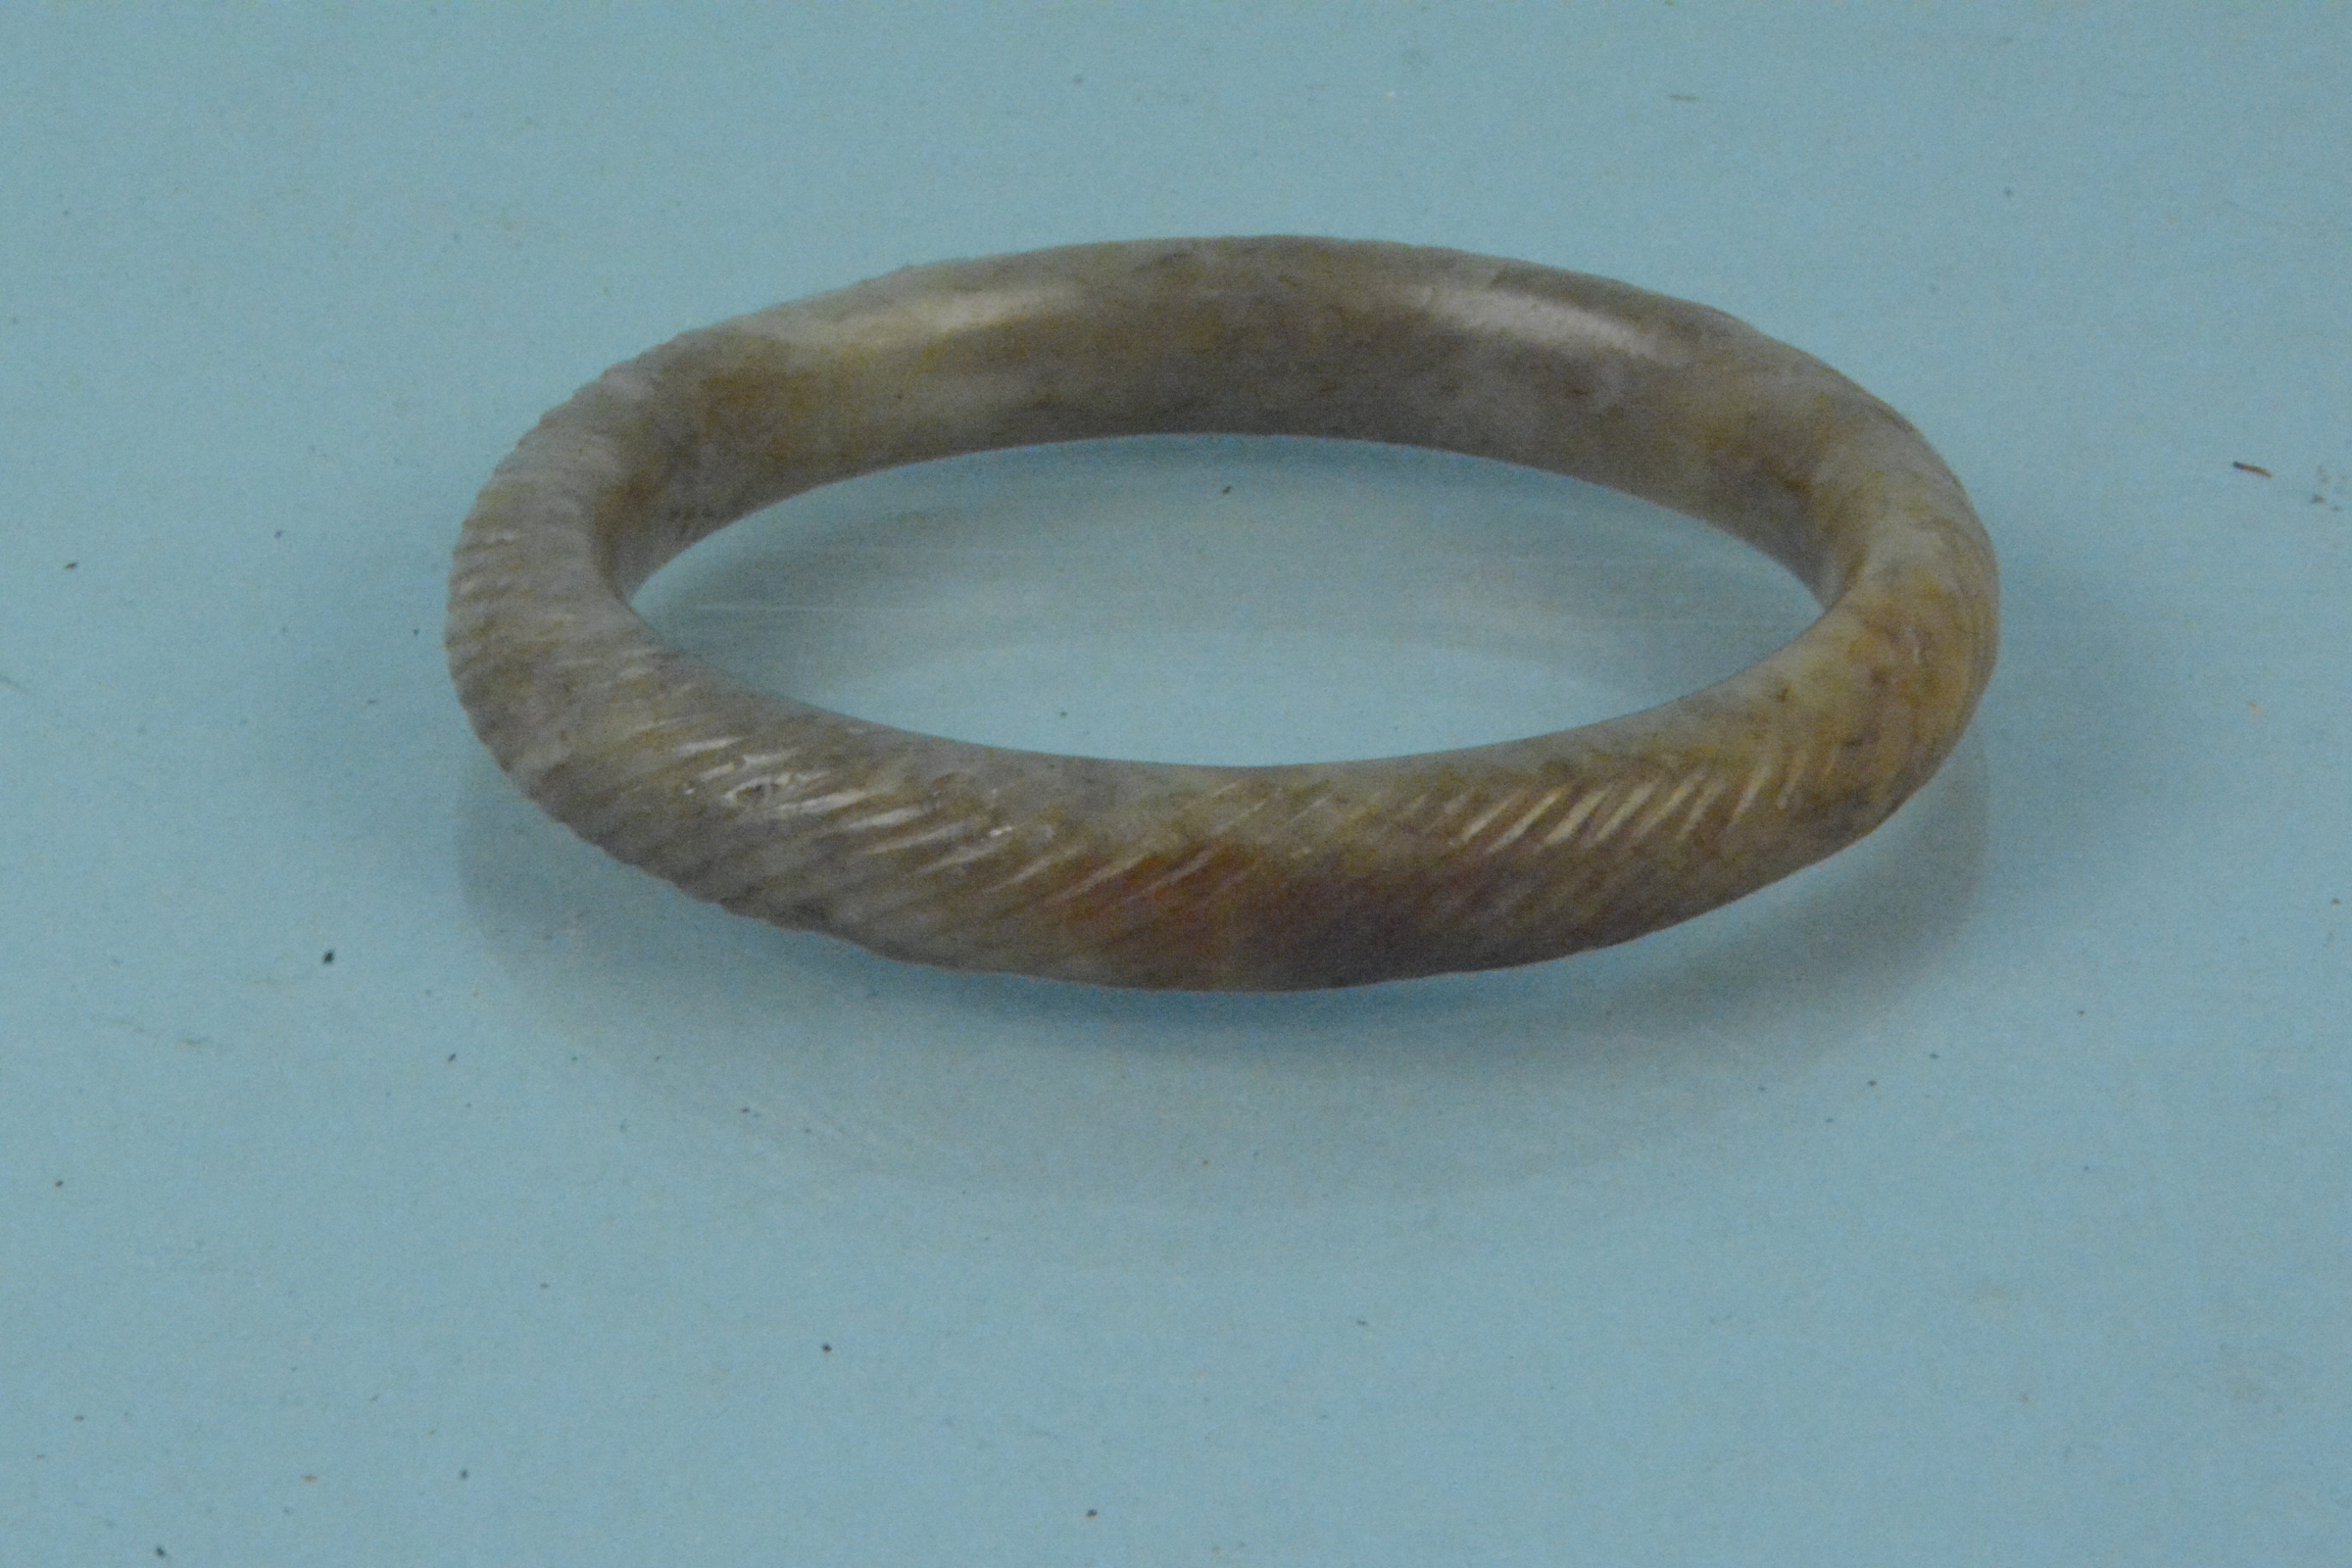 A jade bangle with engraved detail